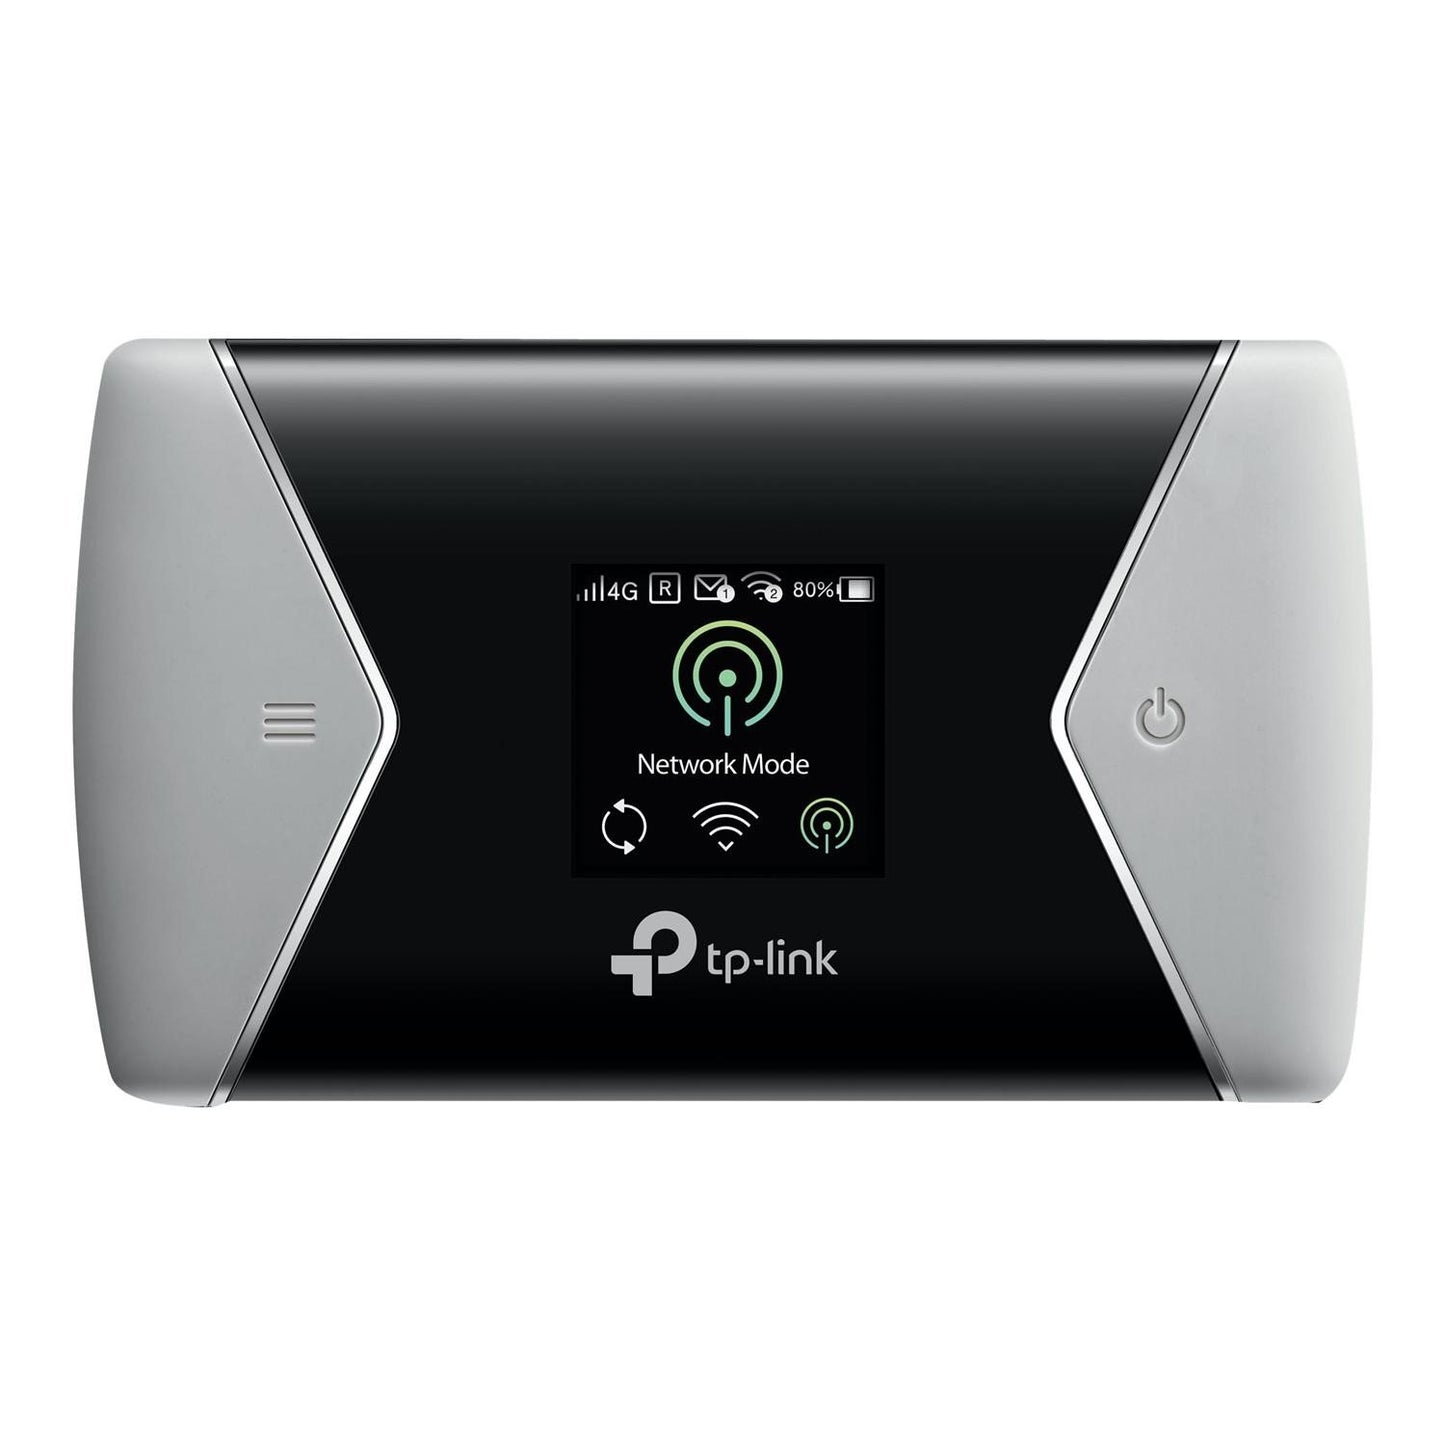 TP-Link M7450 Portable WiFi 5 3G/4G LTE-A Cat 6 Router